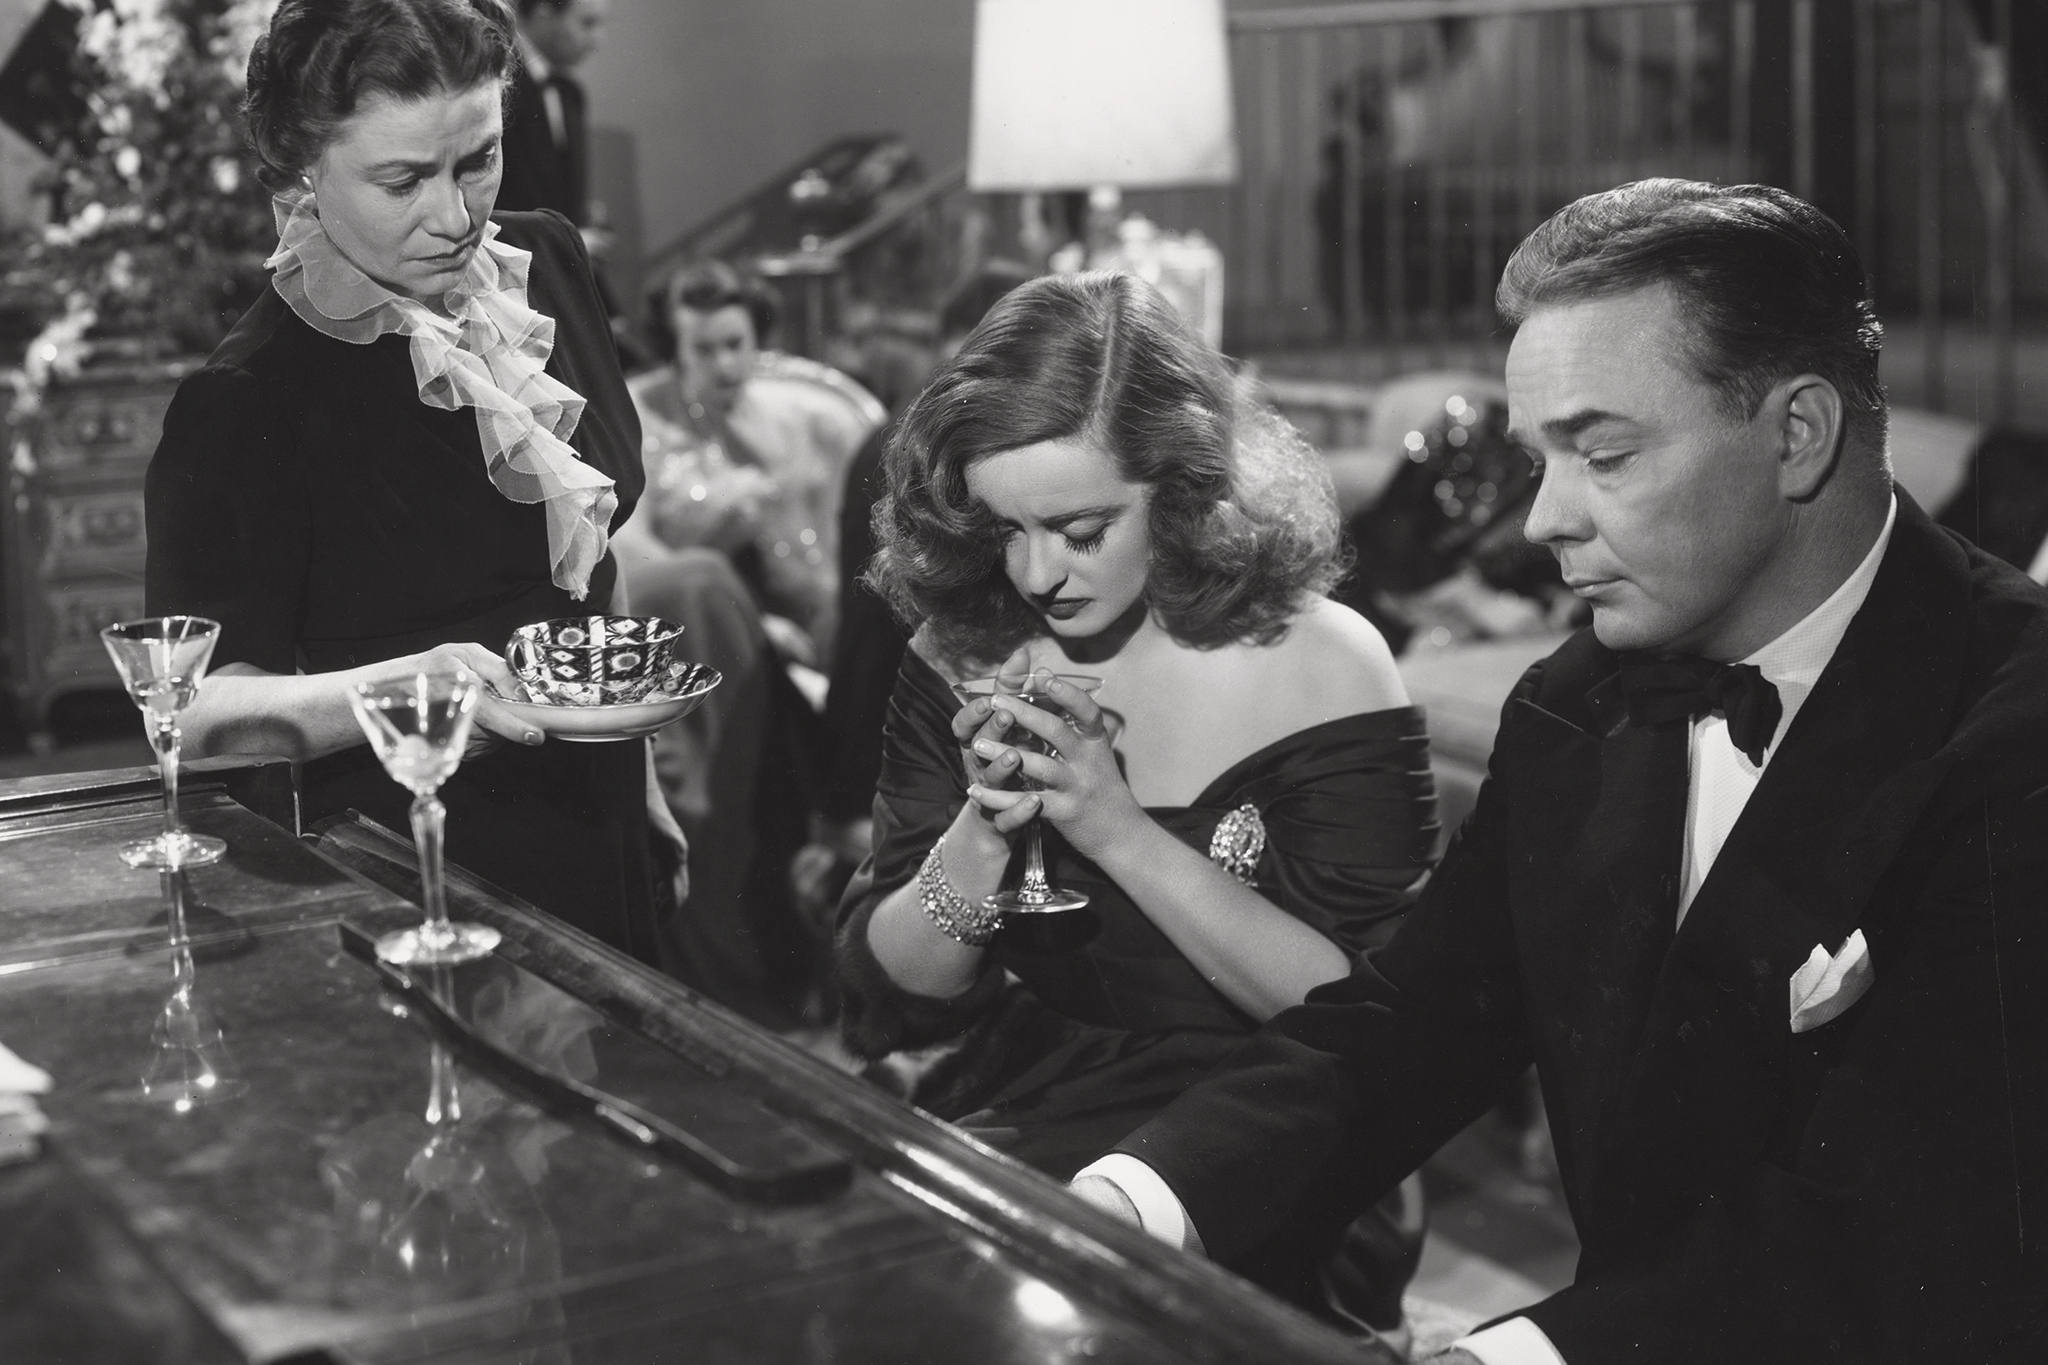 All About Eve 07 Directed By Joseph L Mankiewicz Film Review